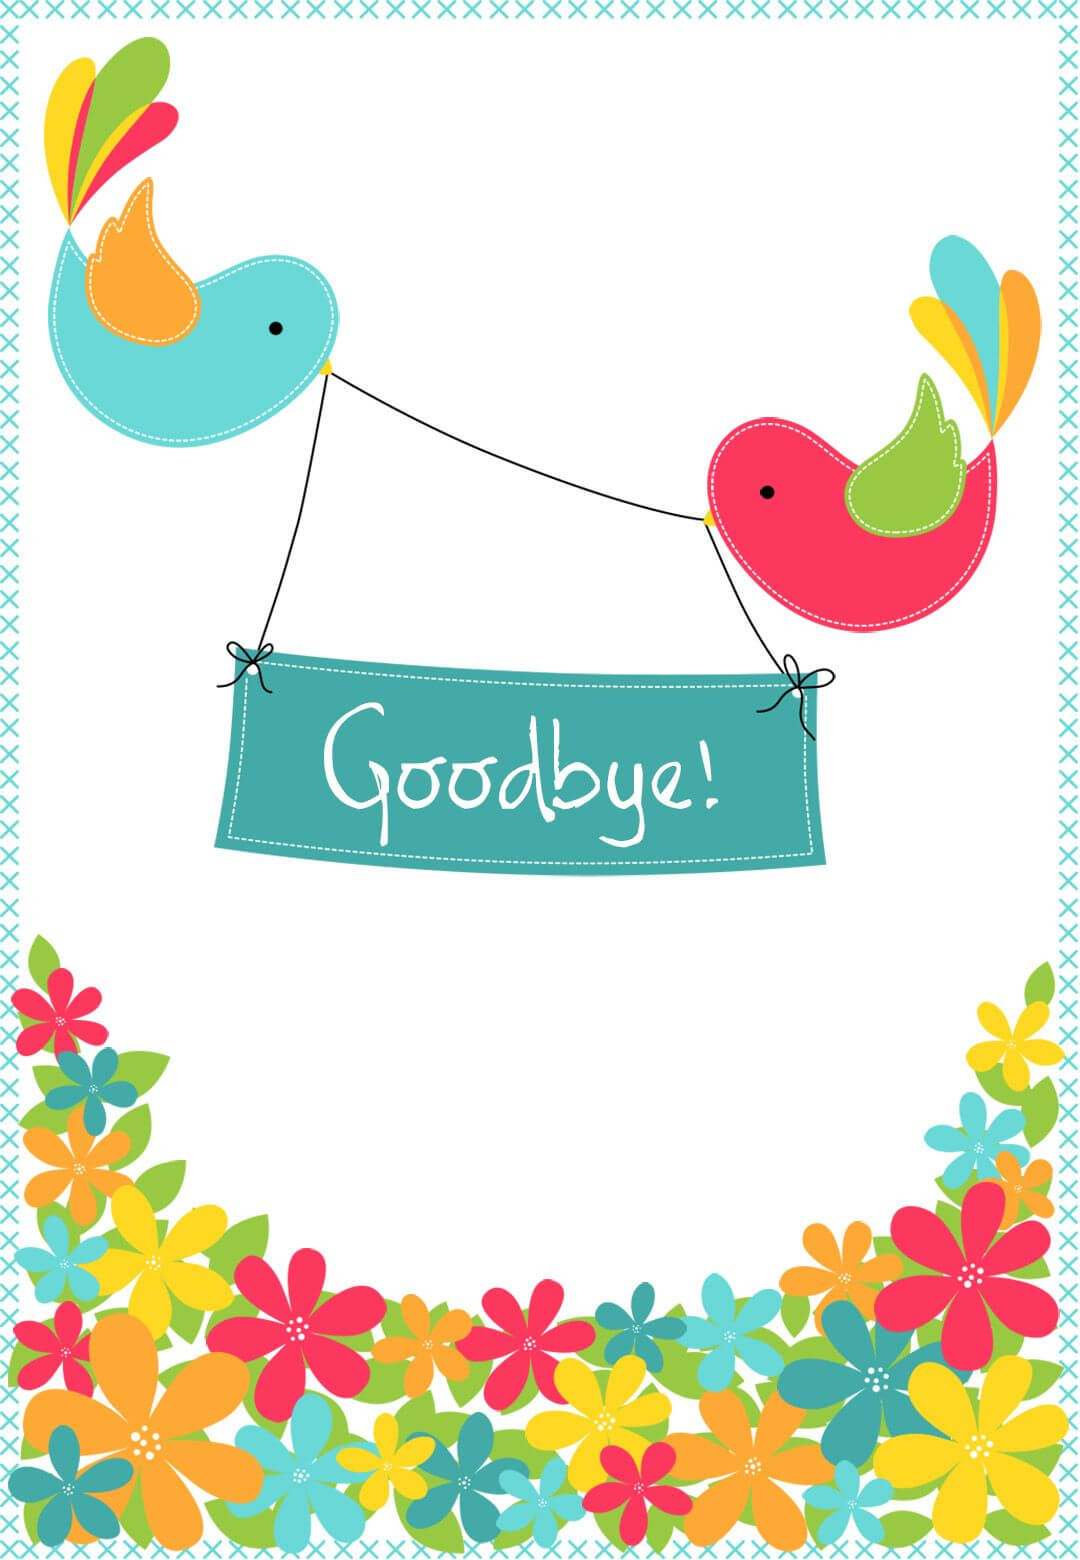 Goodbye From Your Colleagues – Free Good Luck Card Regarding Goodbye Card Template